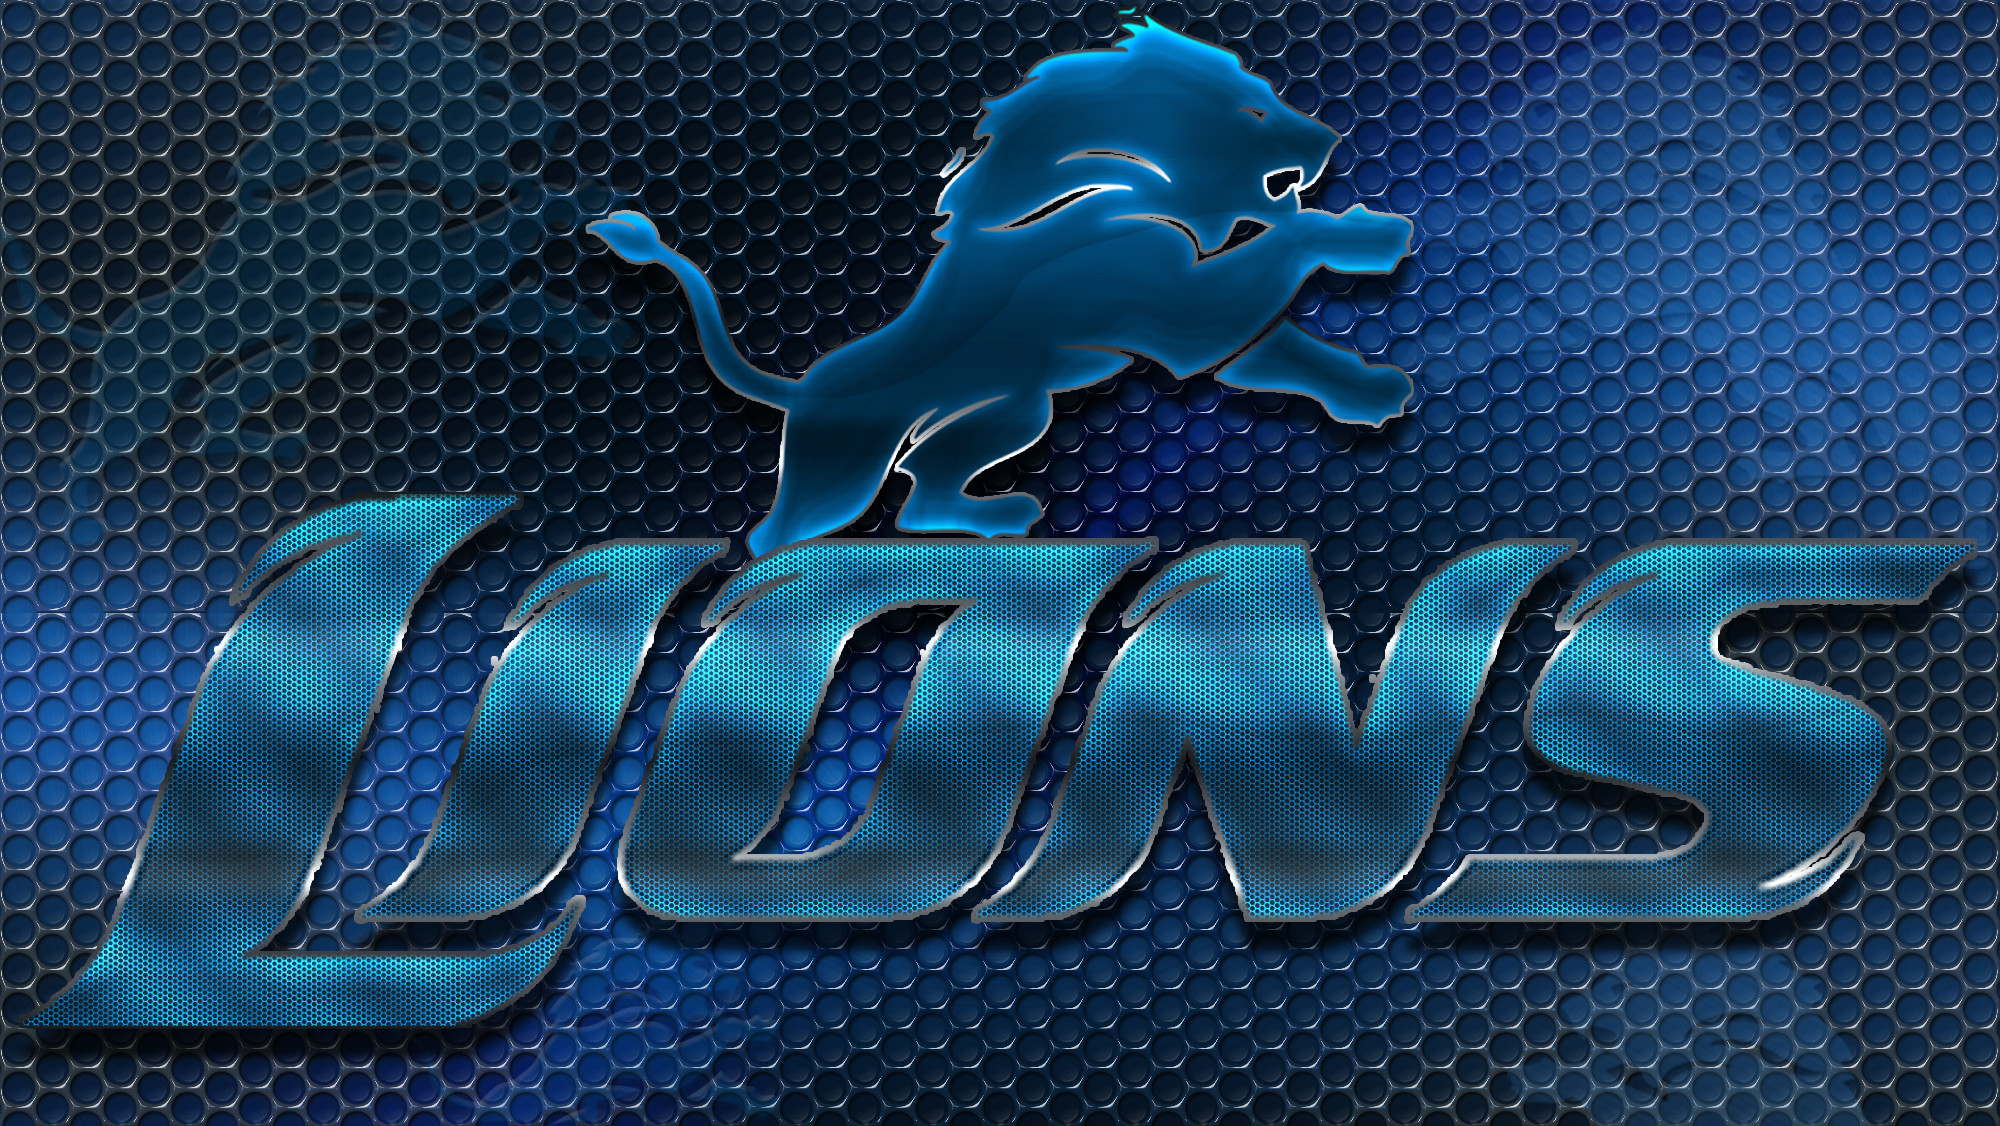 Download free detroit lions wallpapers for your mobile phone by HD Wallpapers Pinterest Detroit lions wallpaper